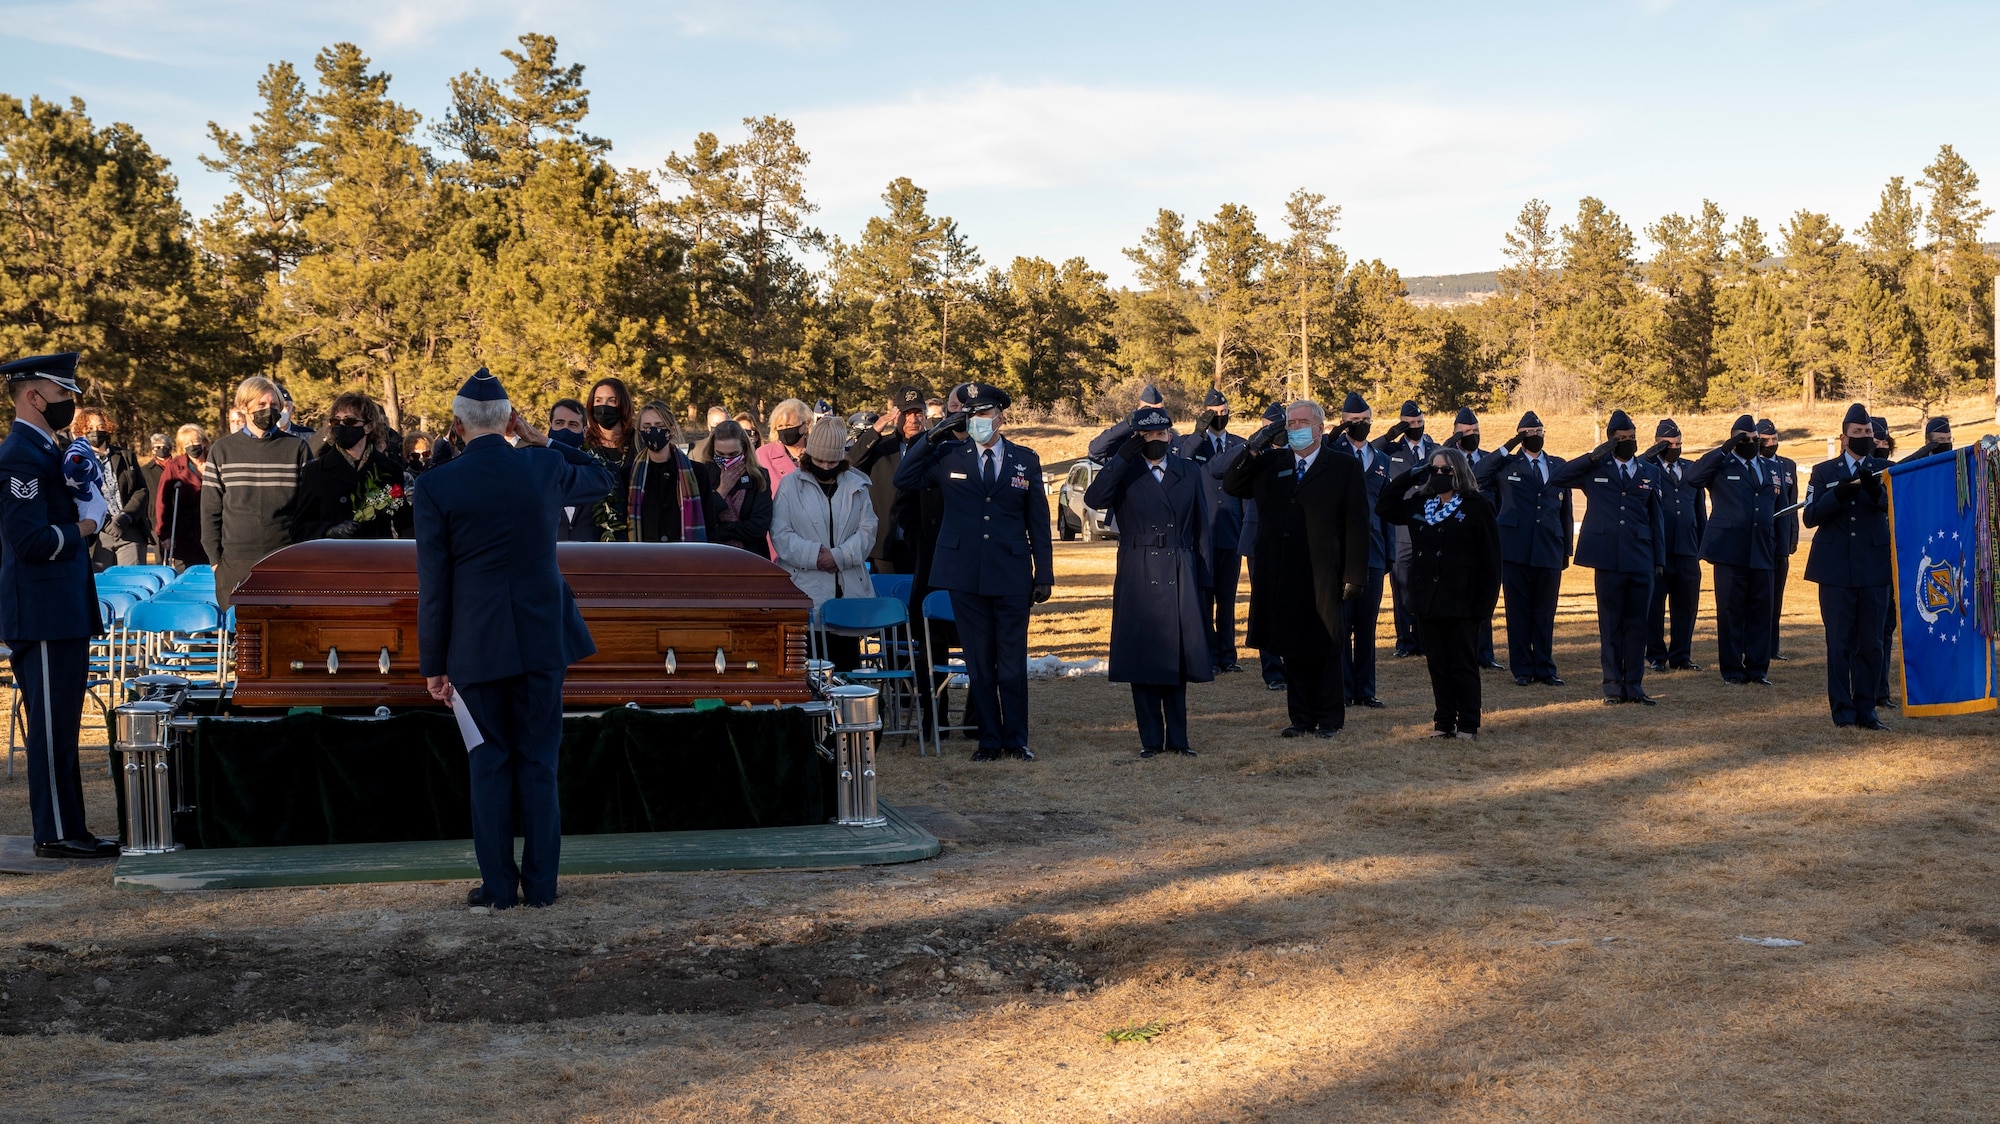 People watch as a burial casket is lowered during a funeral.